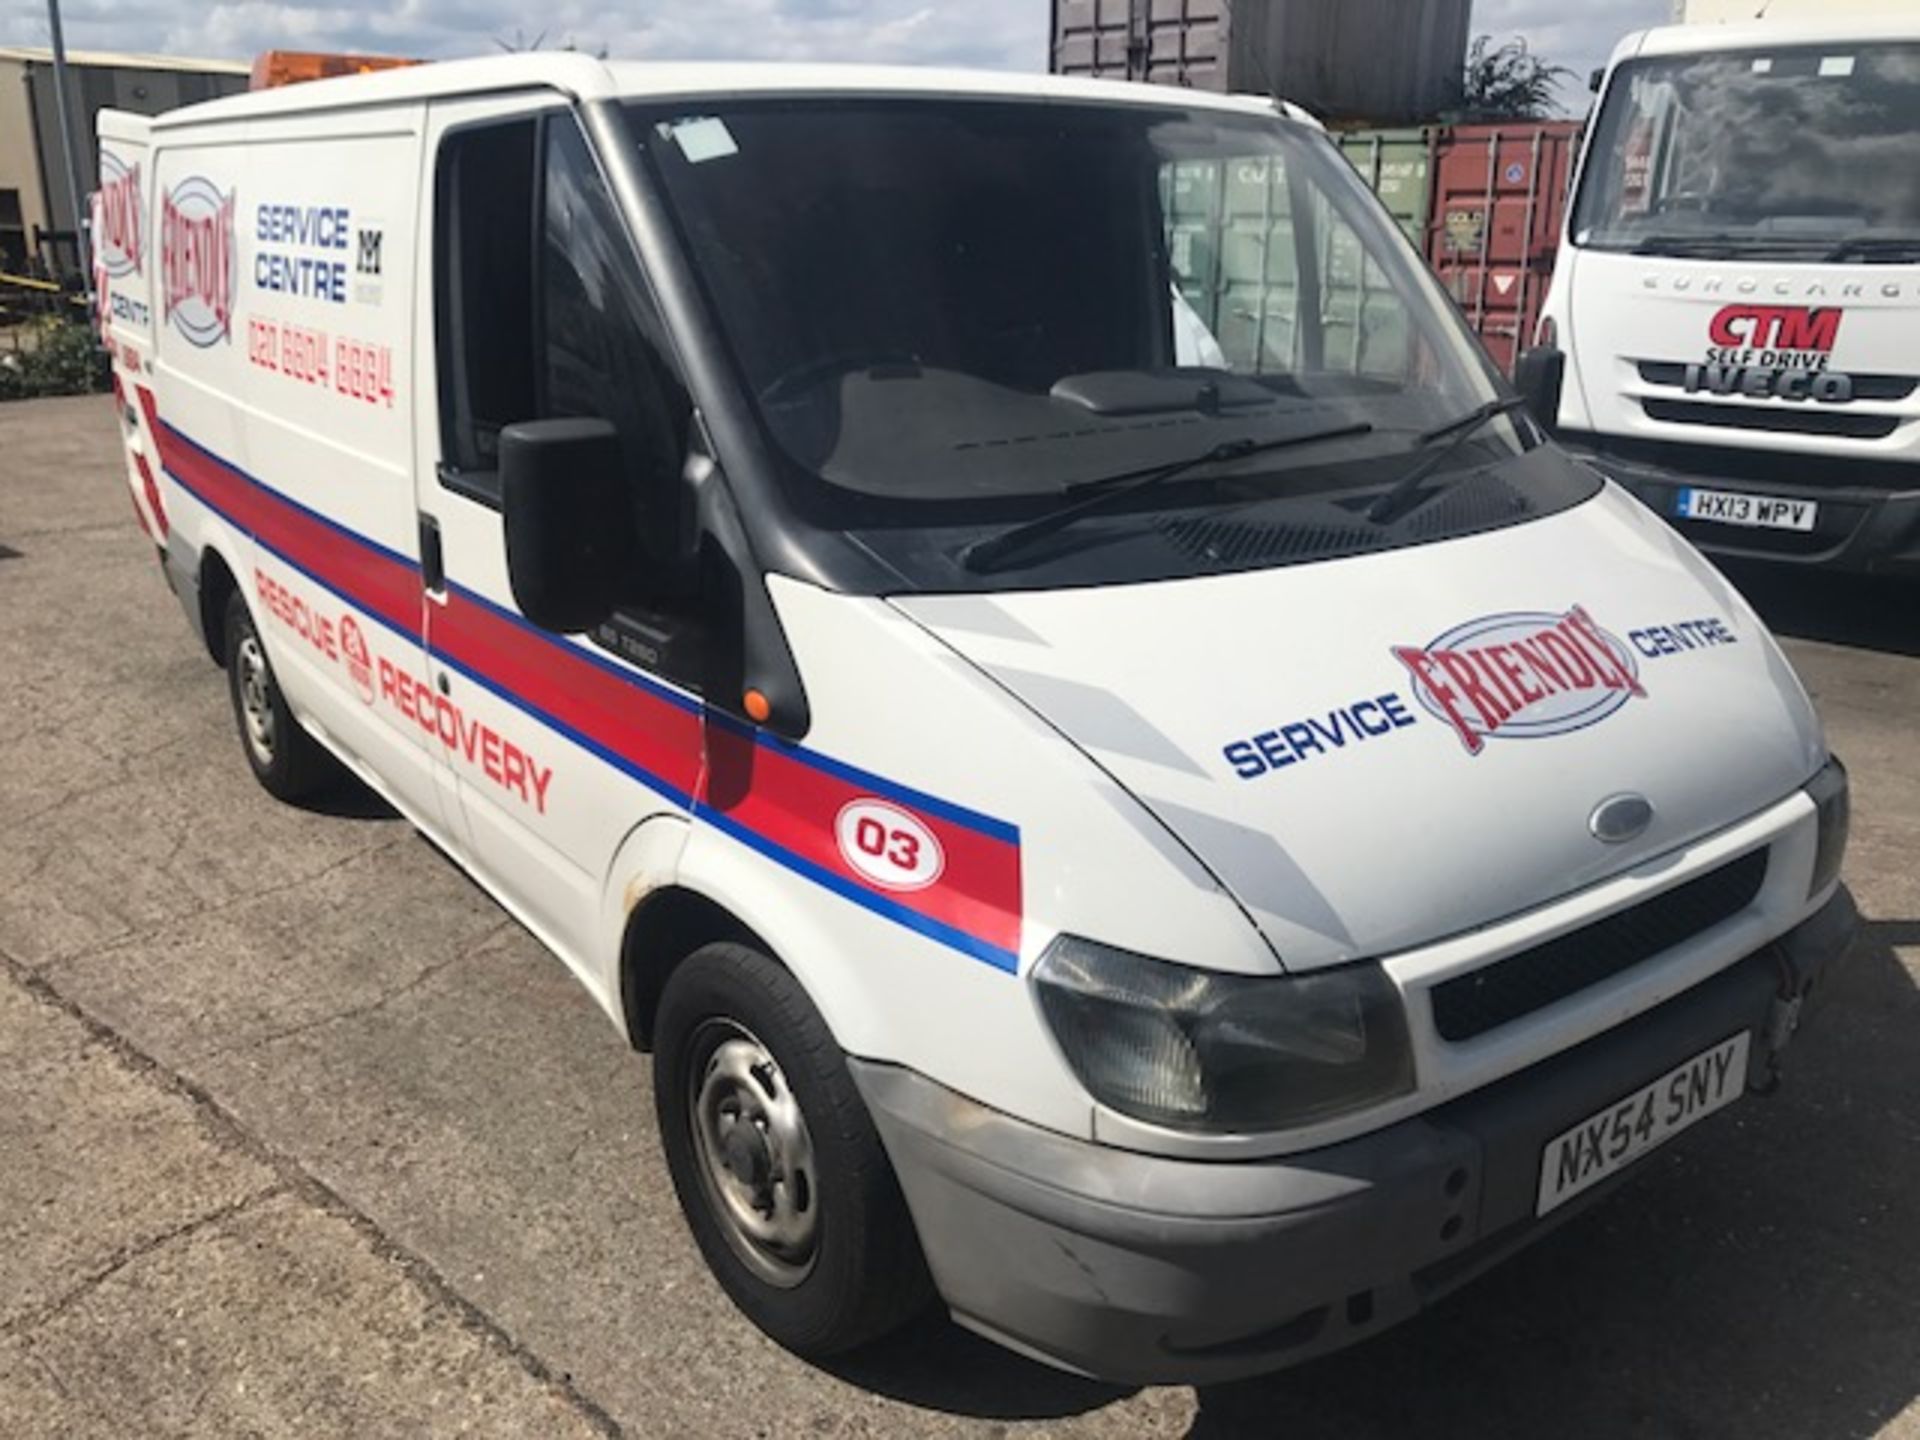 2004 Ford Transit T280 panel van complete with Interntrade Engineering Limited towing dolly,